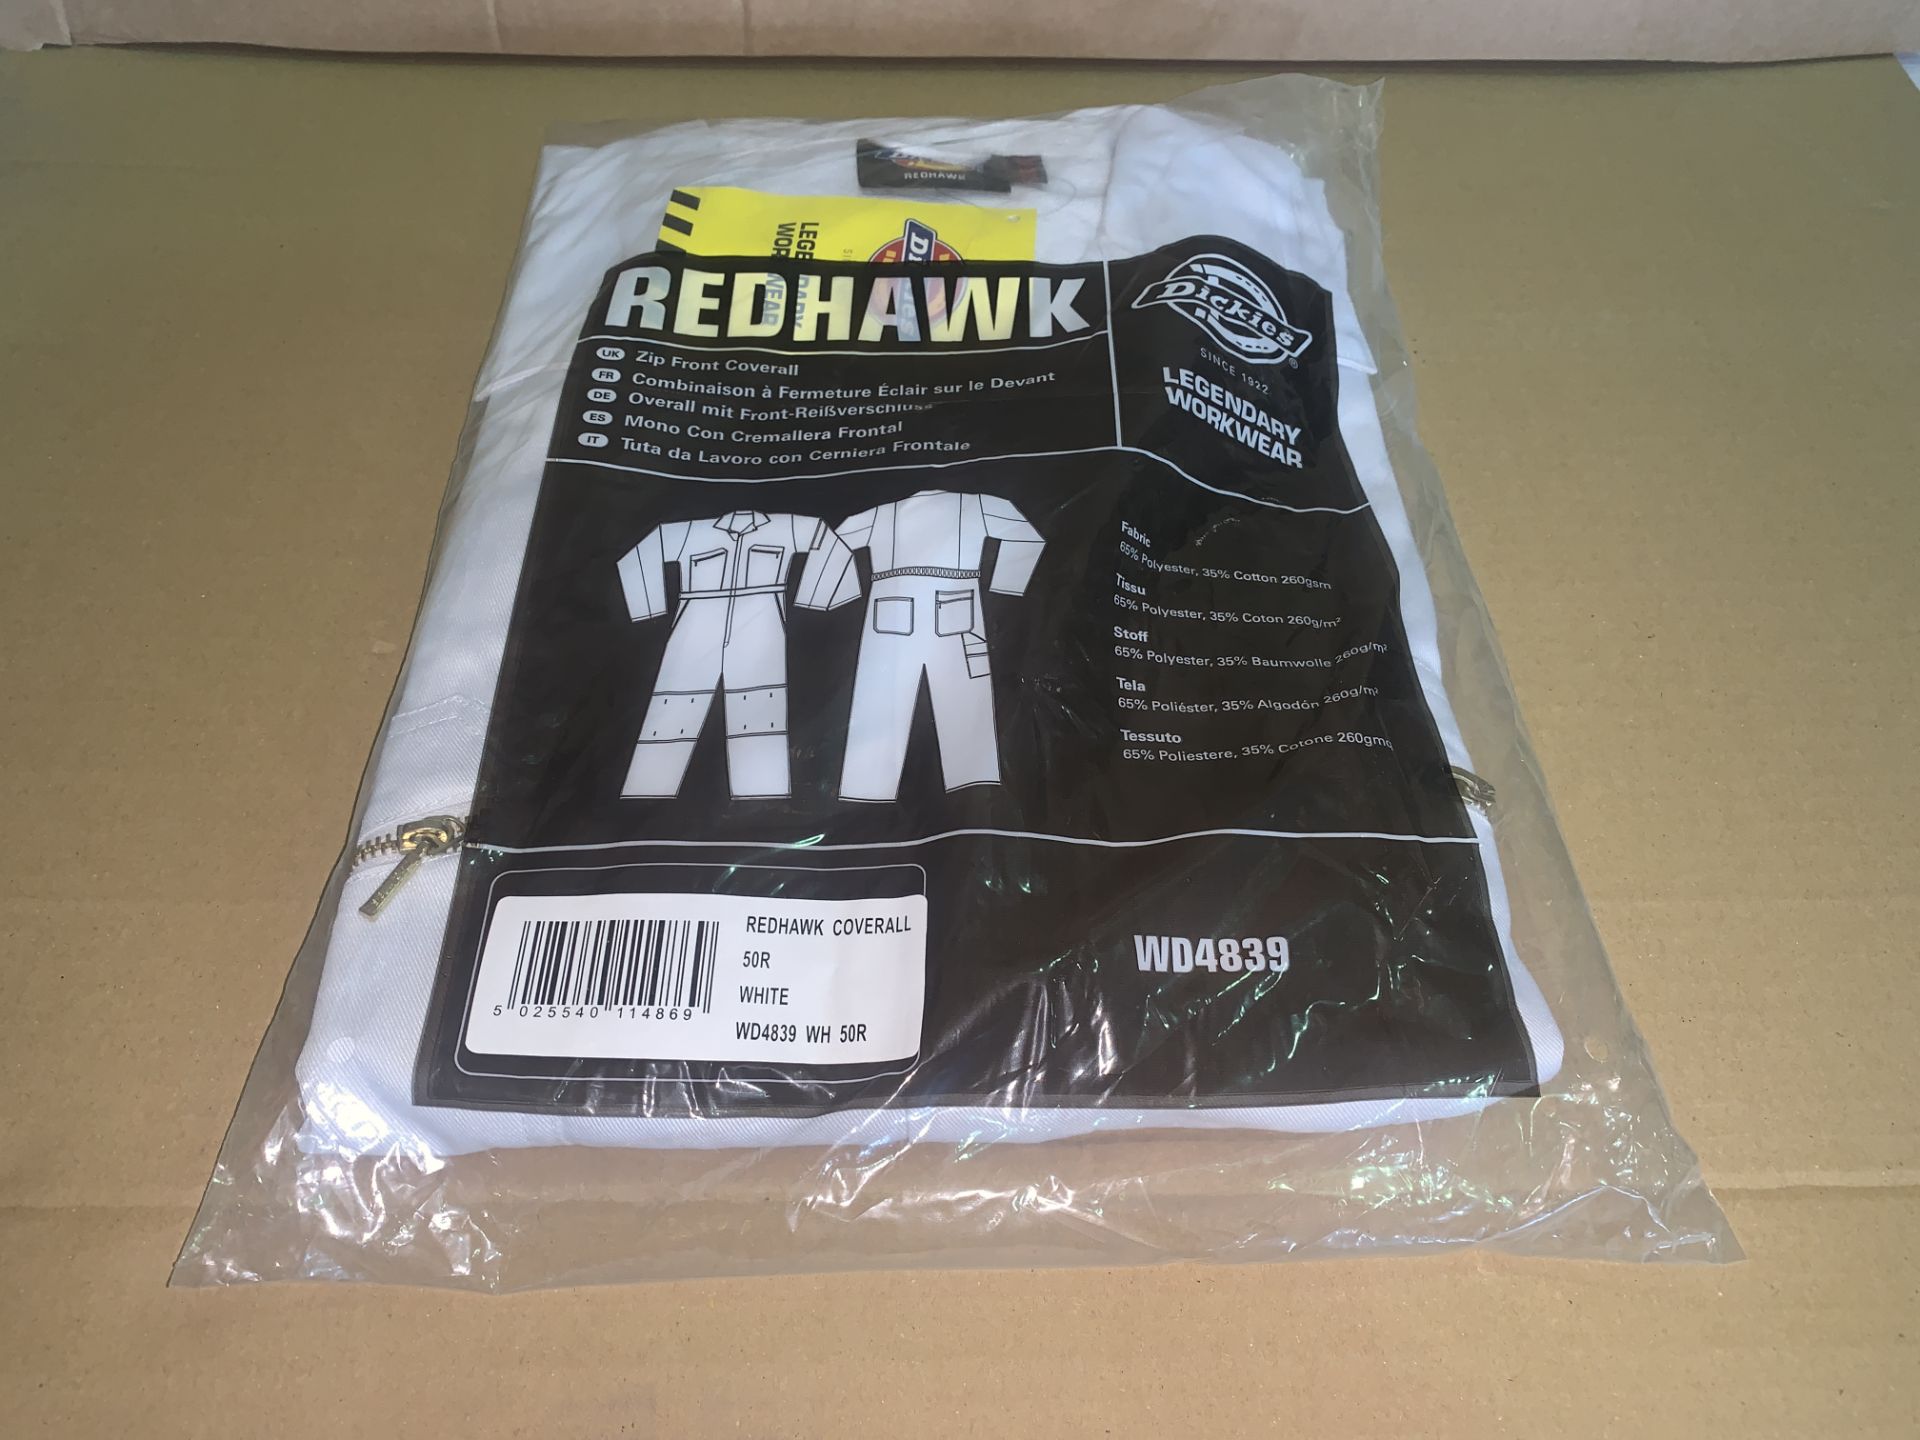 8 X BRAND NEW DICKIES REDHAWK WHITE COVERALLS (SIZES MAY VARY) R15 P